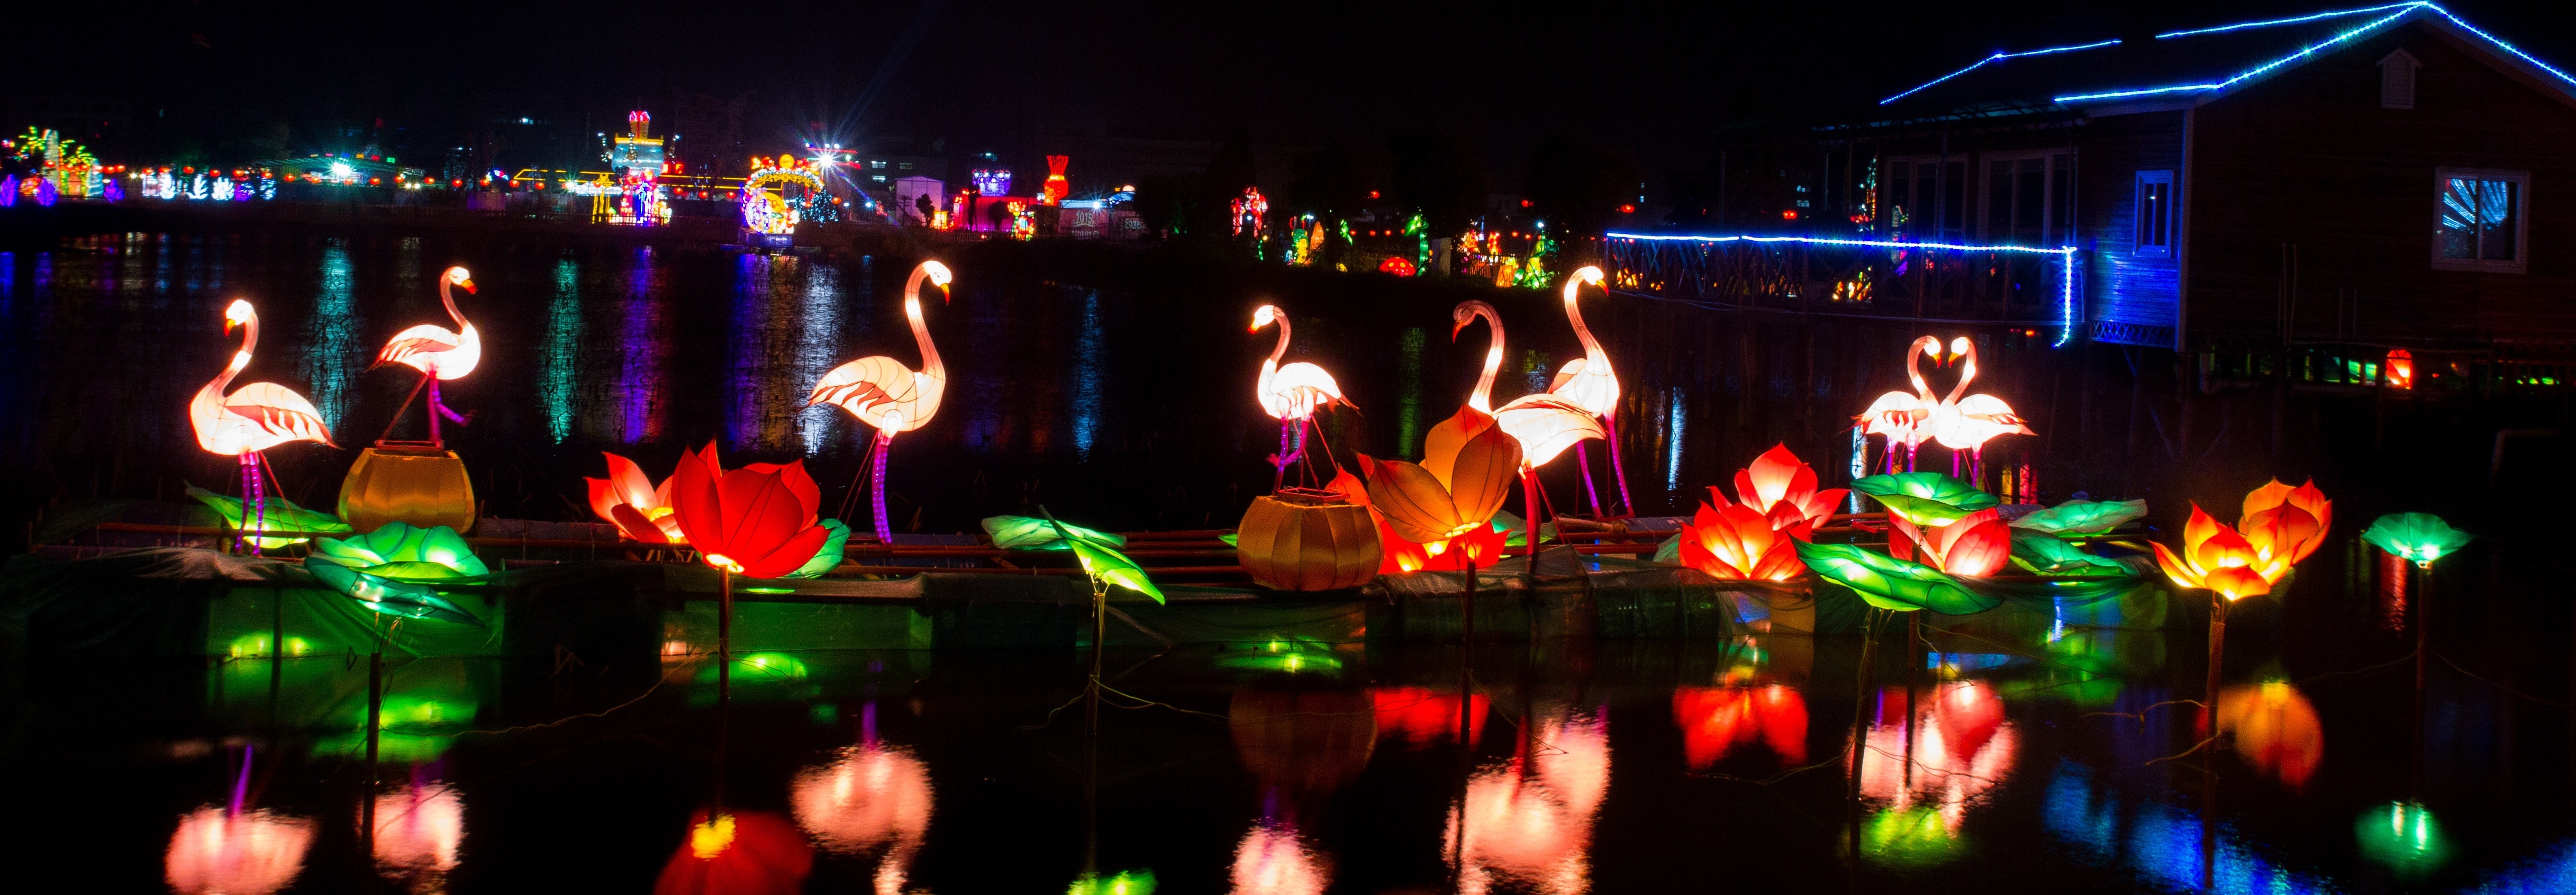 flamingos with lights in a body of water